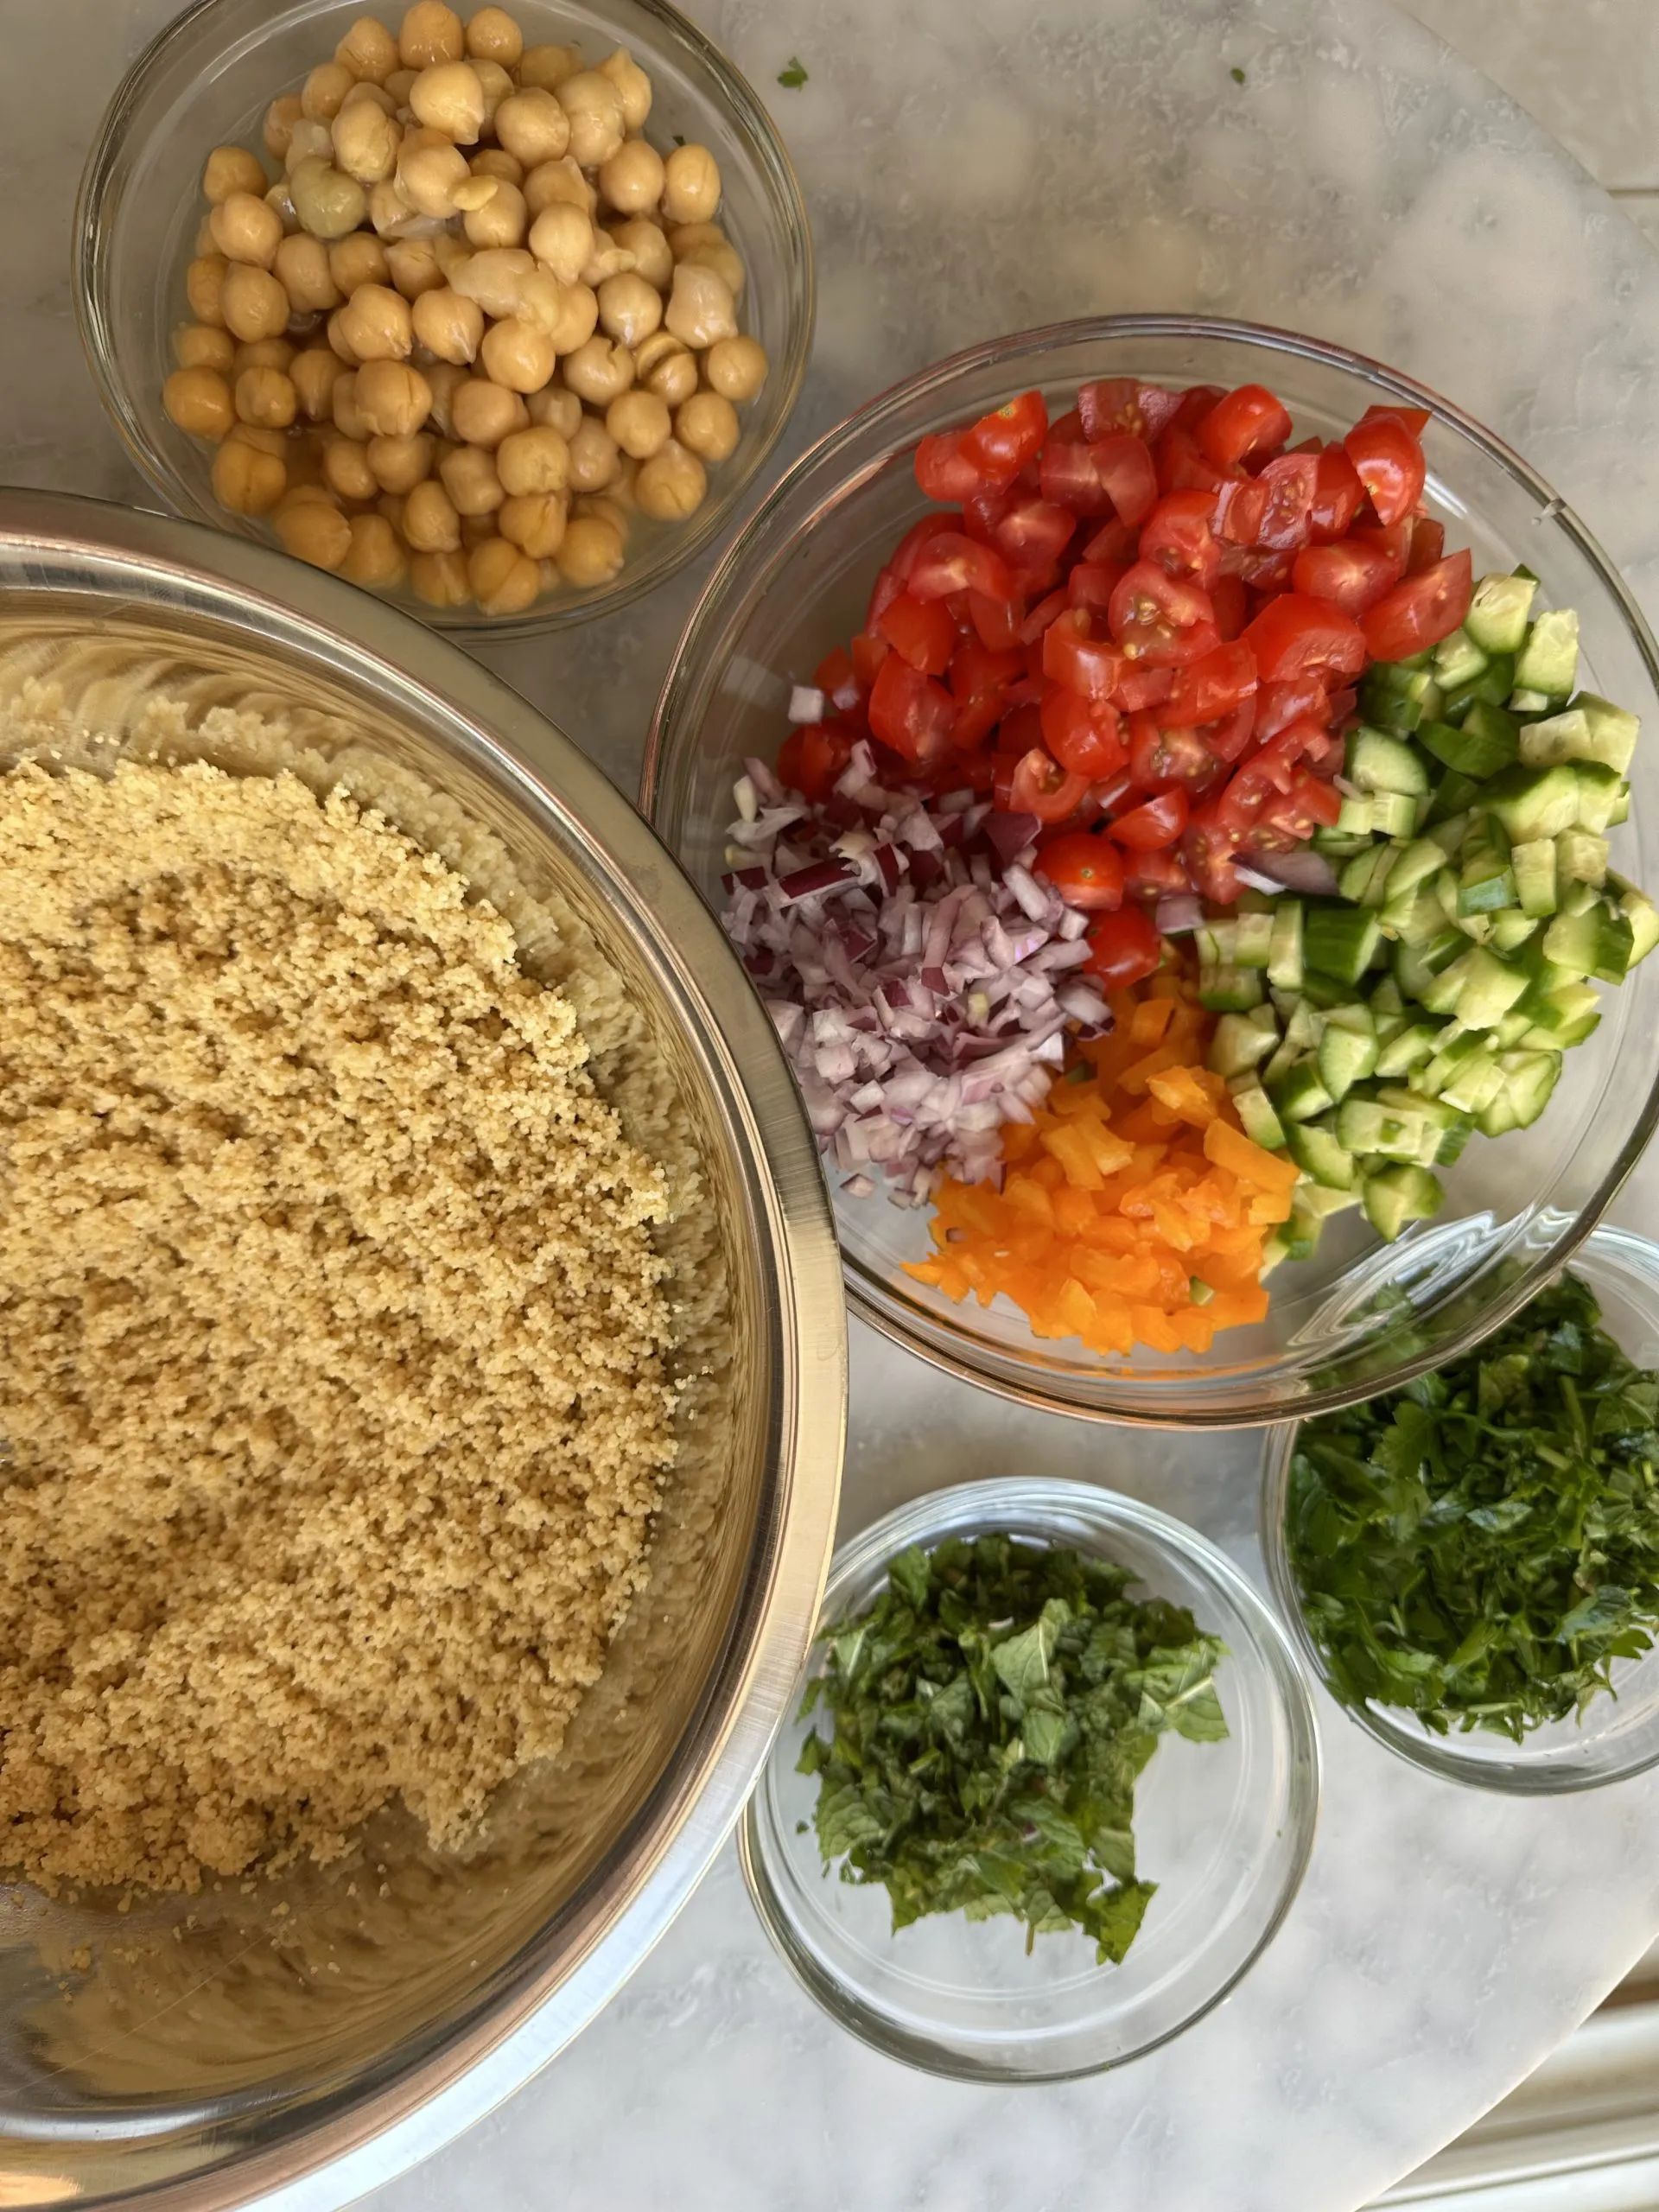 ingredients for taboule salad with cous cous